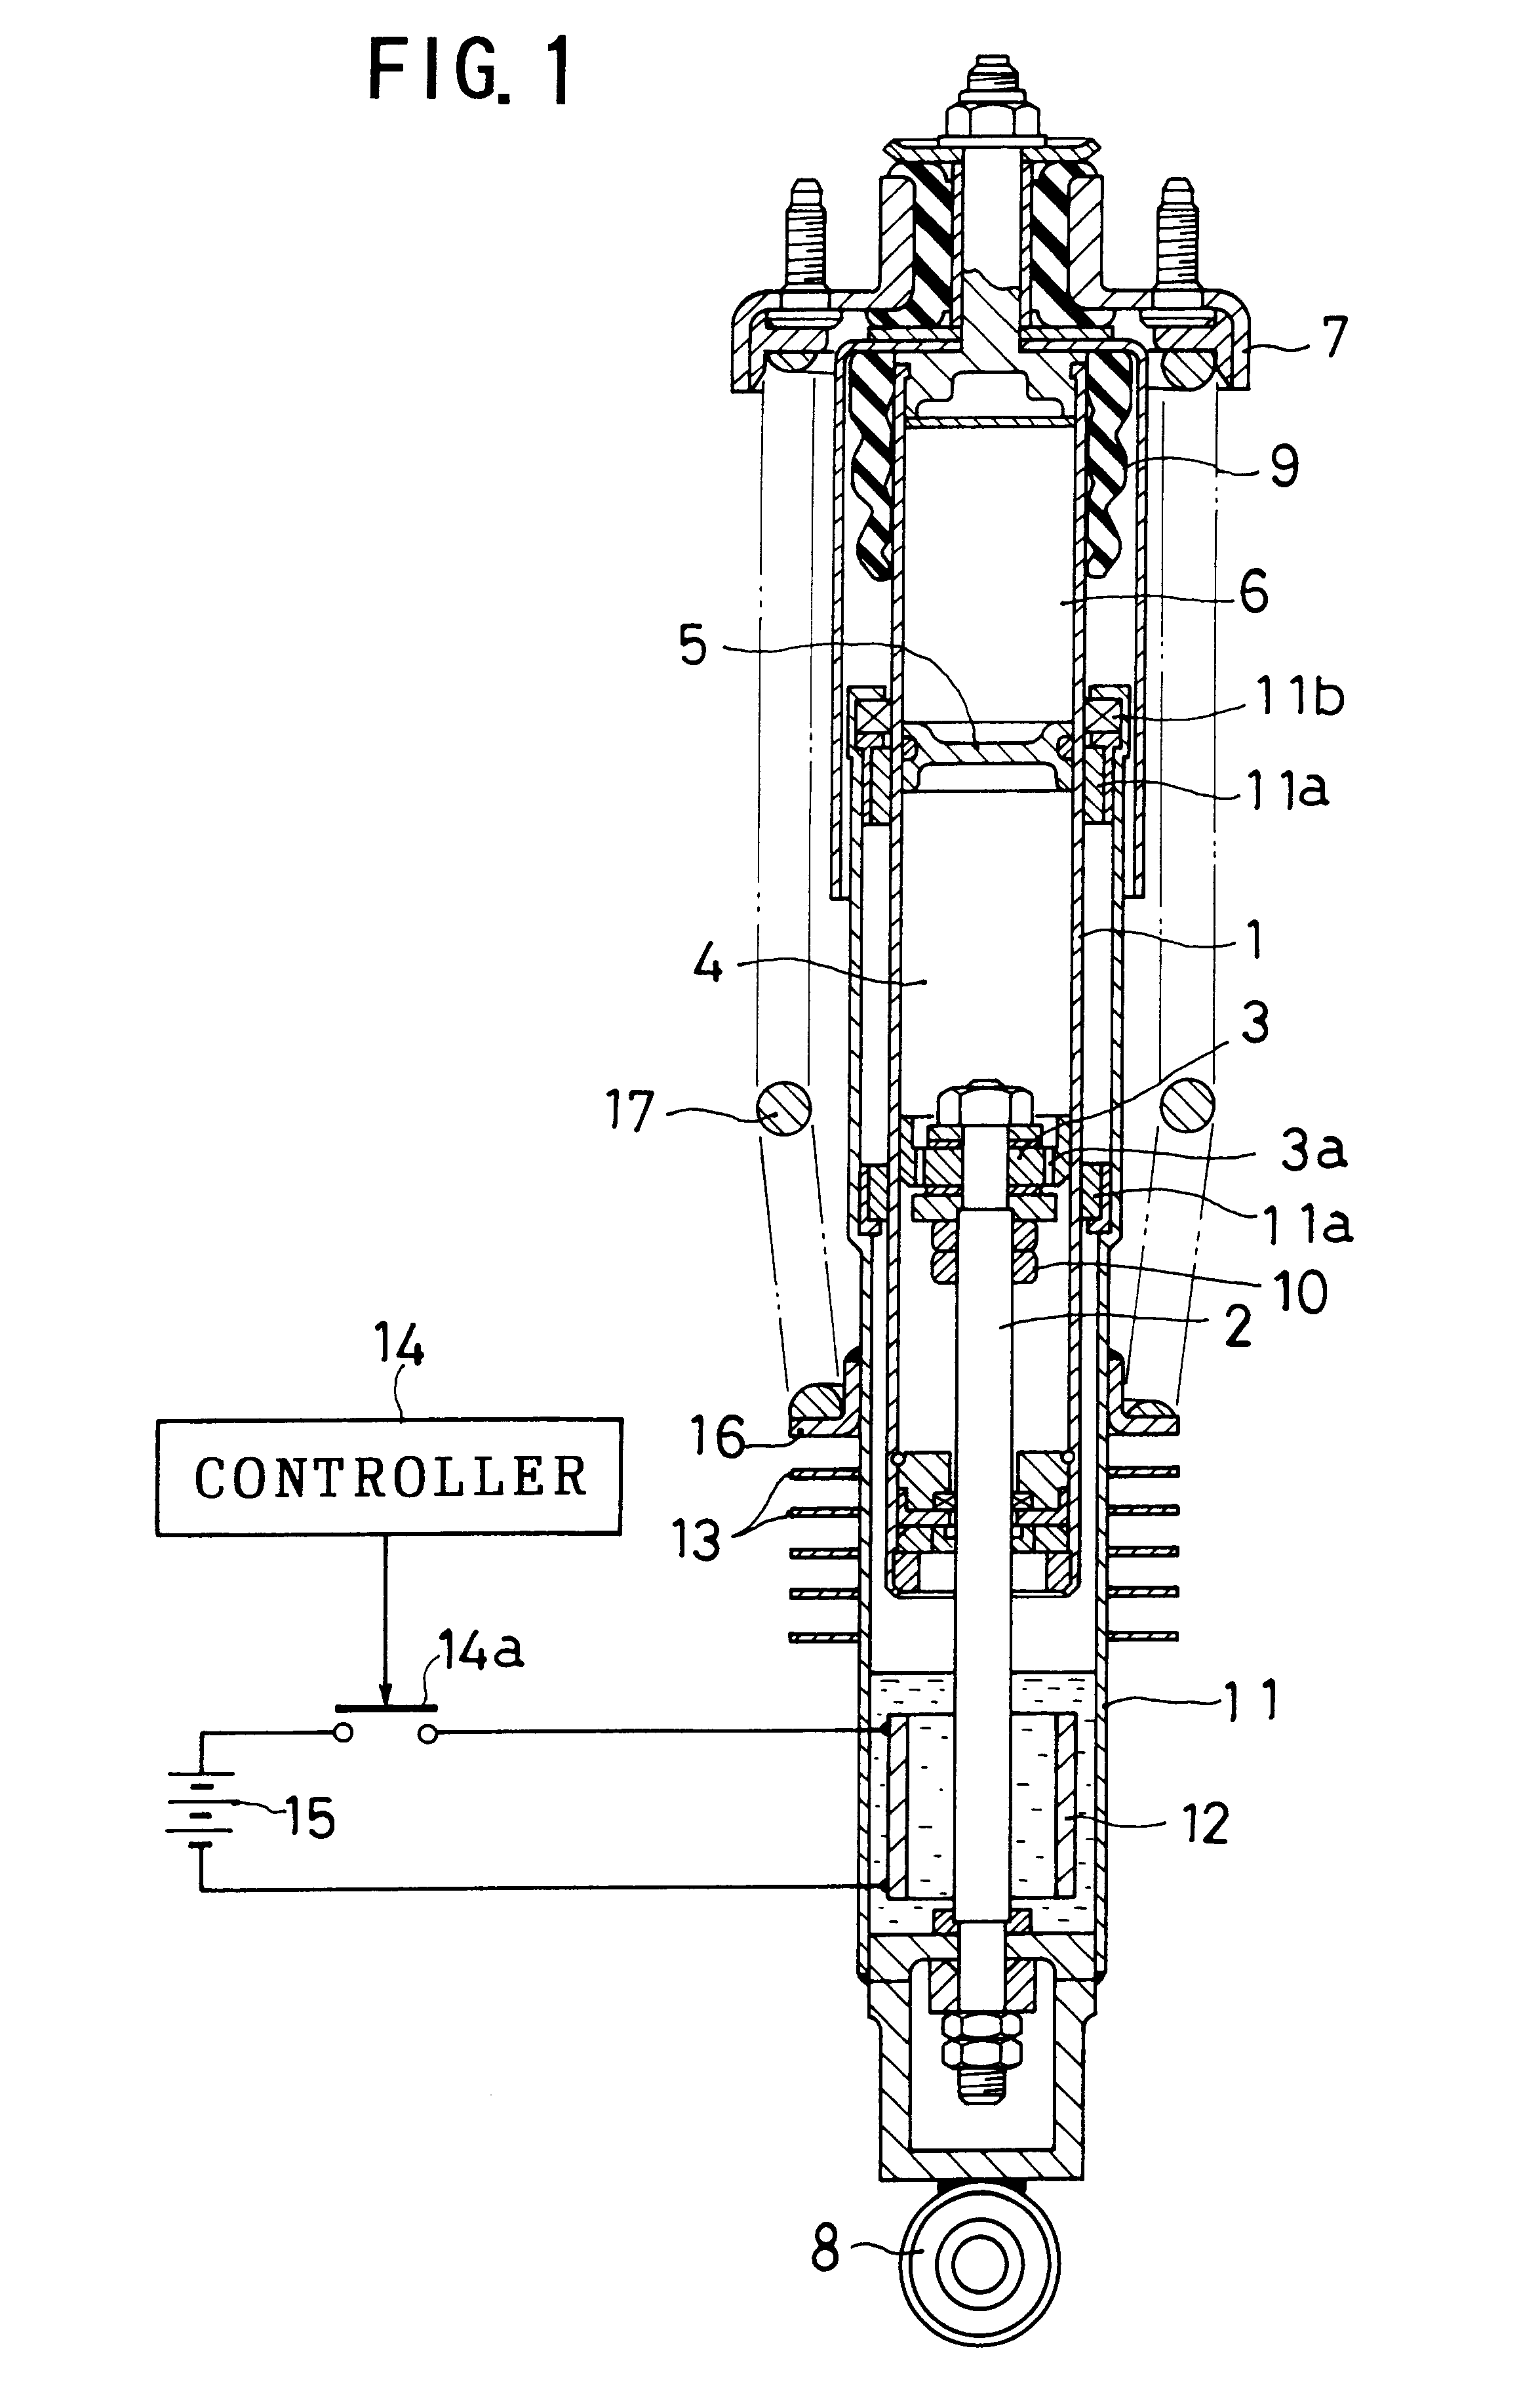 Vehicular damper with vehicle height adjusting function having an internal heat source